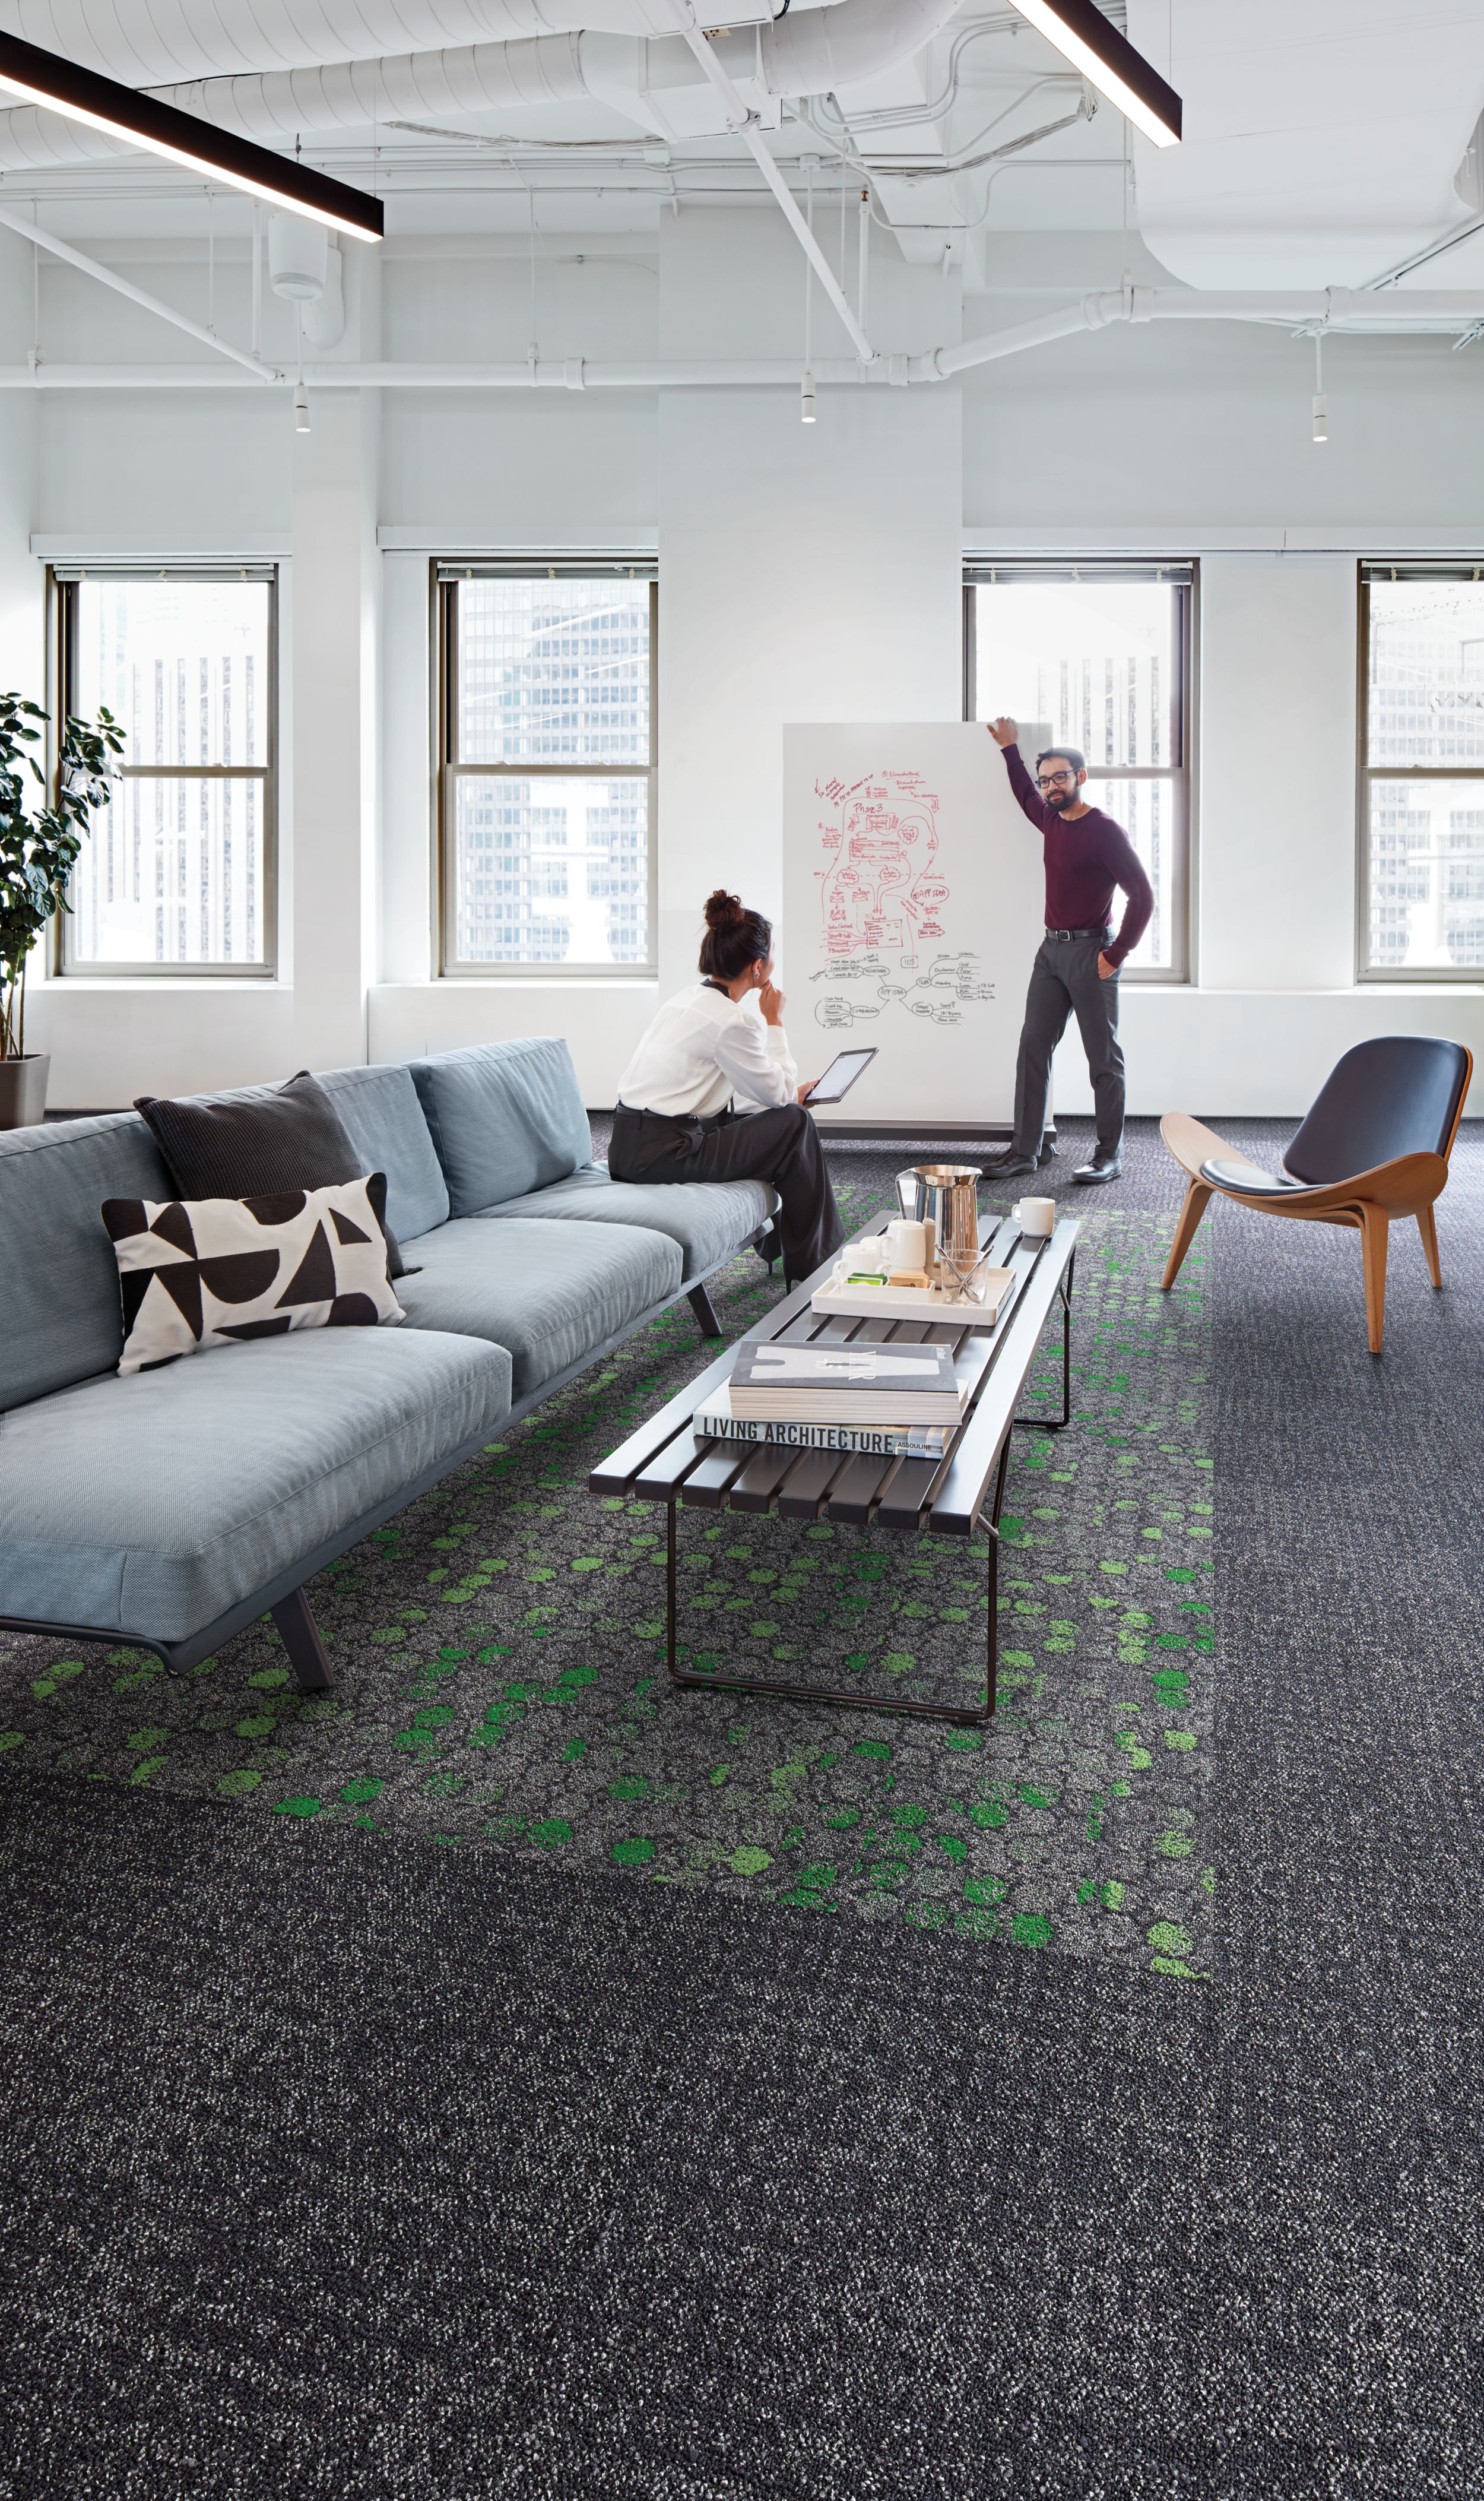 Interface Broome Street and Wheler Street in open office area with people número de imagen 10